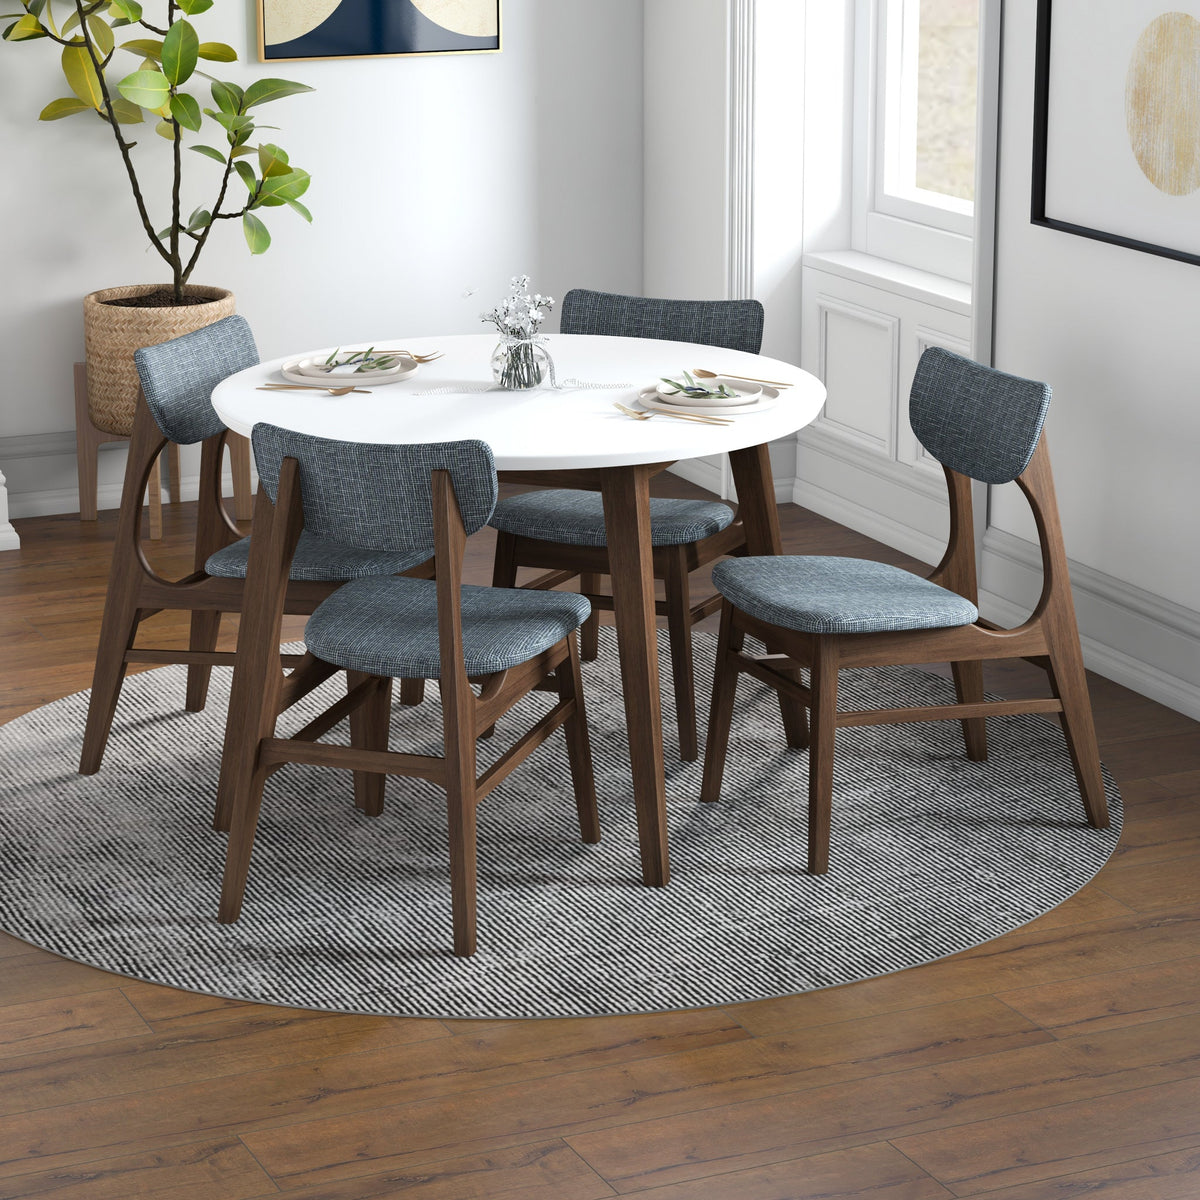 Palmer (White) Round Dining Set with 4 Collins (Grey) Dining Chairs | Mid in Mod | Houston TX | Best Furniture stores in Houston